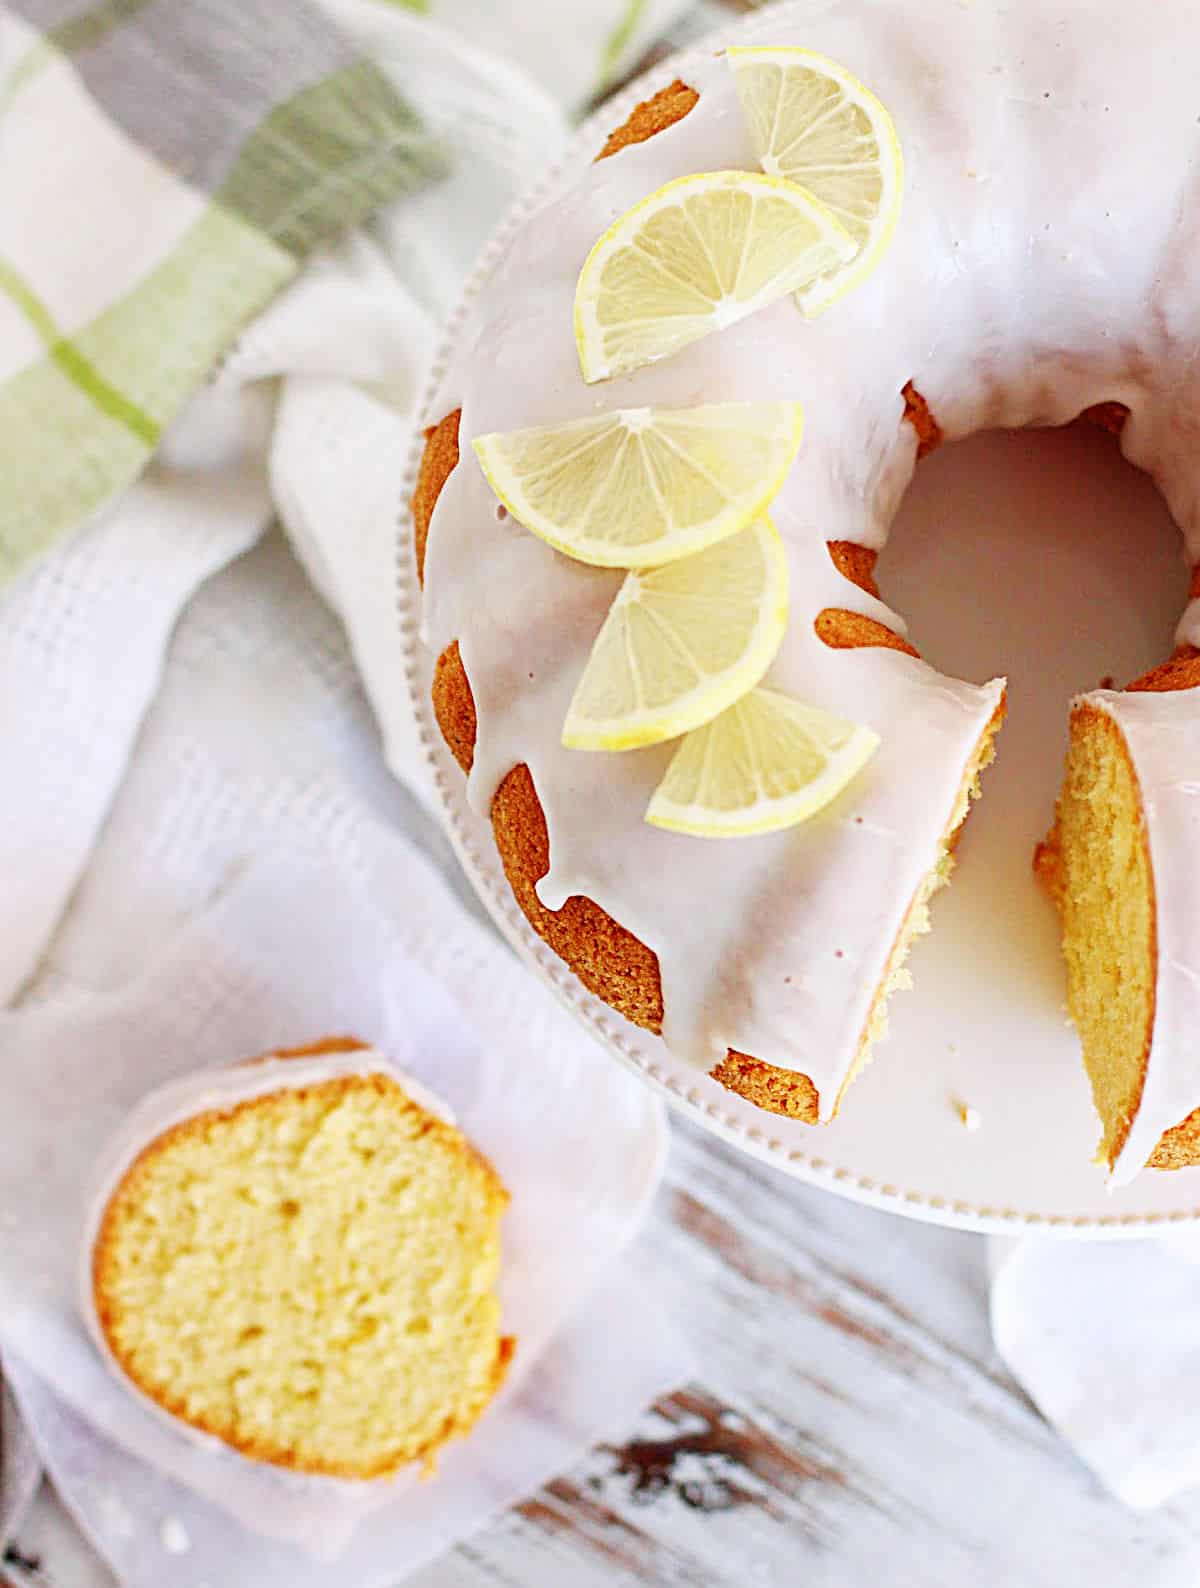 Lemon topped and glazed bundt cake on cake stand, white table, slice of cake and green cloth